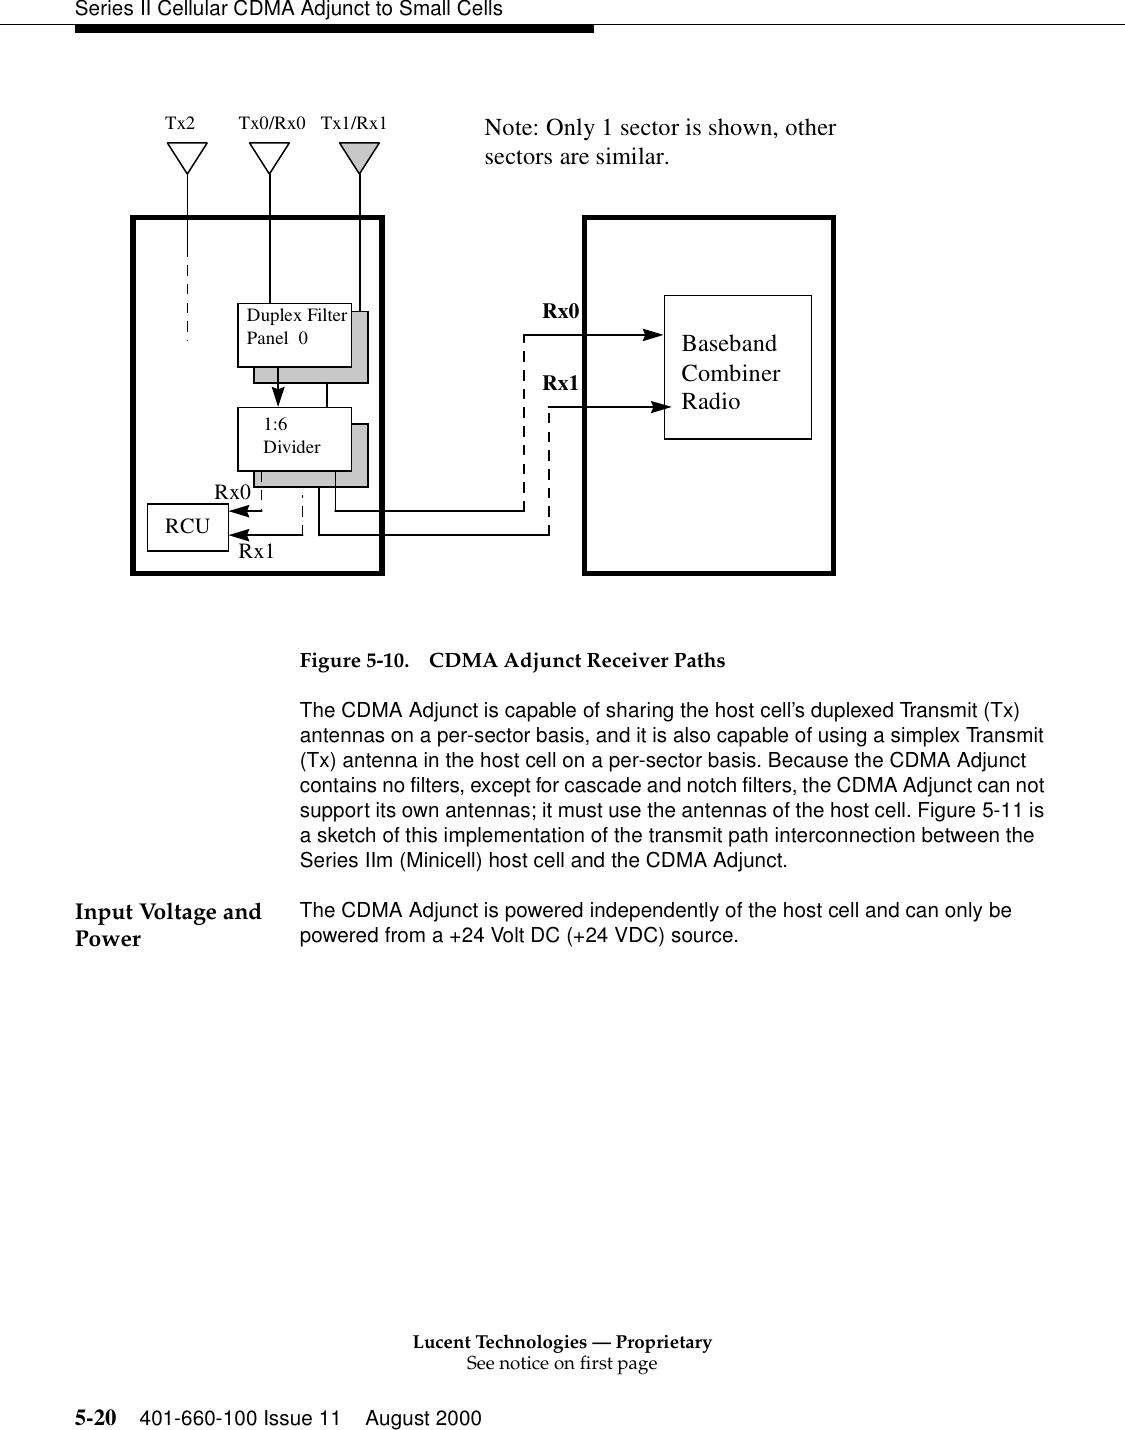 Lucent Technologies — ProprietarySee notice on first page5-20 401-660-100 Issue 11 August 2000Series II Cellular CDMA Adjunct to Small CellsFigure 5-10. CDMA Adjunct Receiver PathsThe CDMA Adjunct is capable of sharing the host cell’s duplexed Transmit (Tx) antennas on a per-sector basis, and it is also capable of using a simplex Transmit (Tx) antenna in the host cell on a per-sector basis. Because the CDMA Adjunct contains no filters, except for cascade and notch filters, the CDMA Adjunct can not support its own antennas; it must use the antennas of the host cell. Figure 5-11 is a sketch of this implementation of the transmit path interconnection between the Series IIm (Minicell) host cell and the CDMA Adjunct.Input Voltage and Power The CDMA Adjunct is powered independently of the host cell and can only be powered from a +24 Volt DC (+24 VDC) source.Duplex FilterPanel  01:6DividerRCURx0Rx1Tx0/Rx0 Tx1/Rx1Tx2BasebandCombinerRadioRx0Rx1Note: Only 1 sector is shown, othersectors are similar.